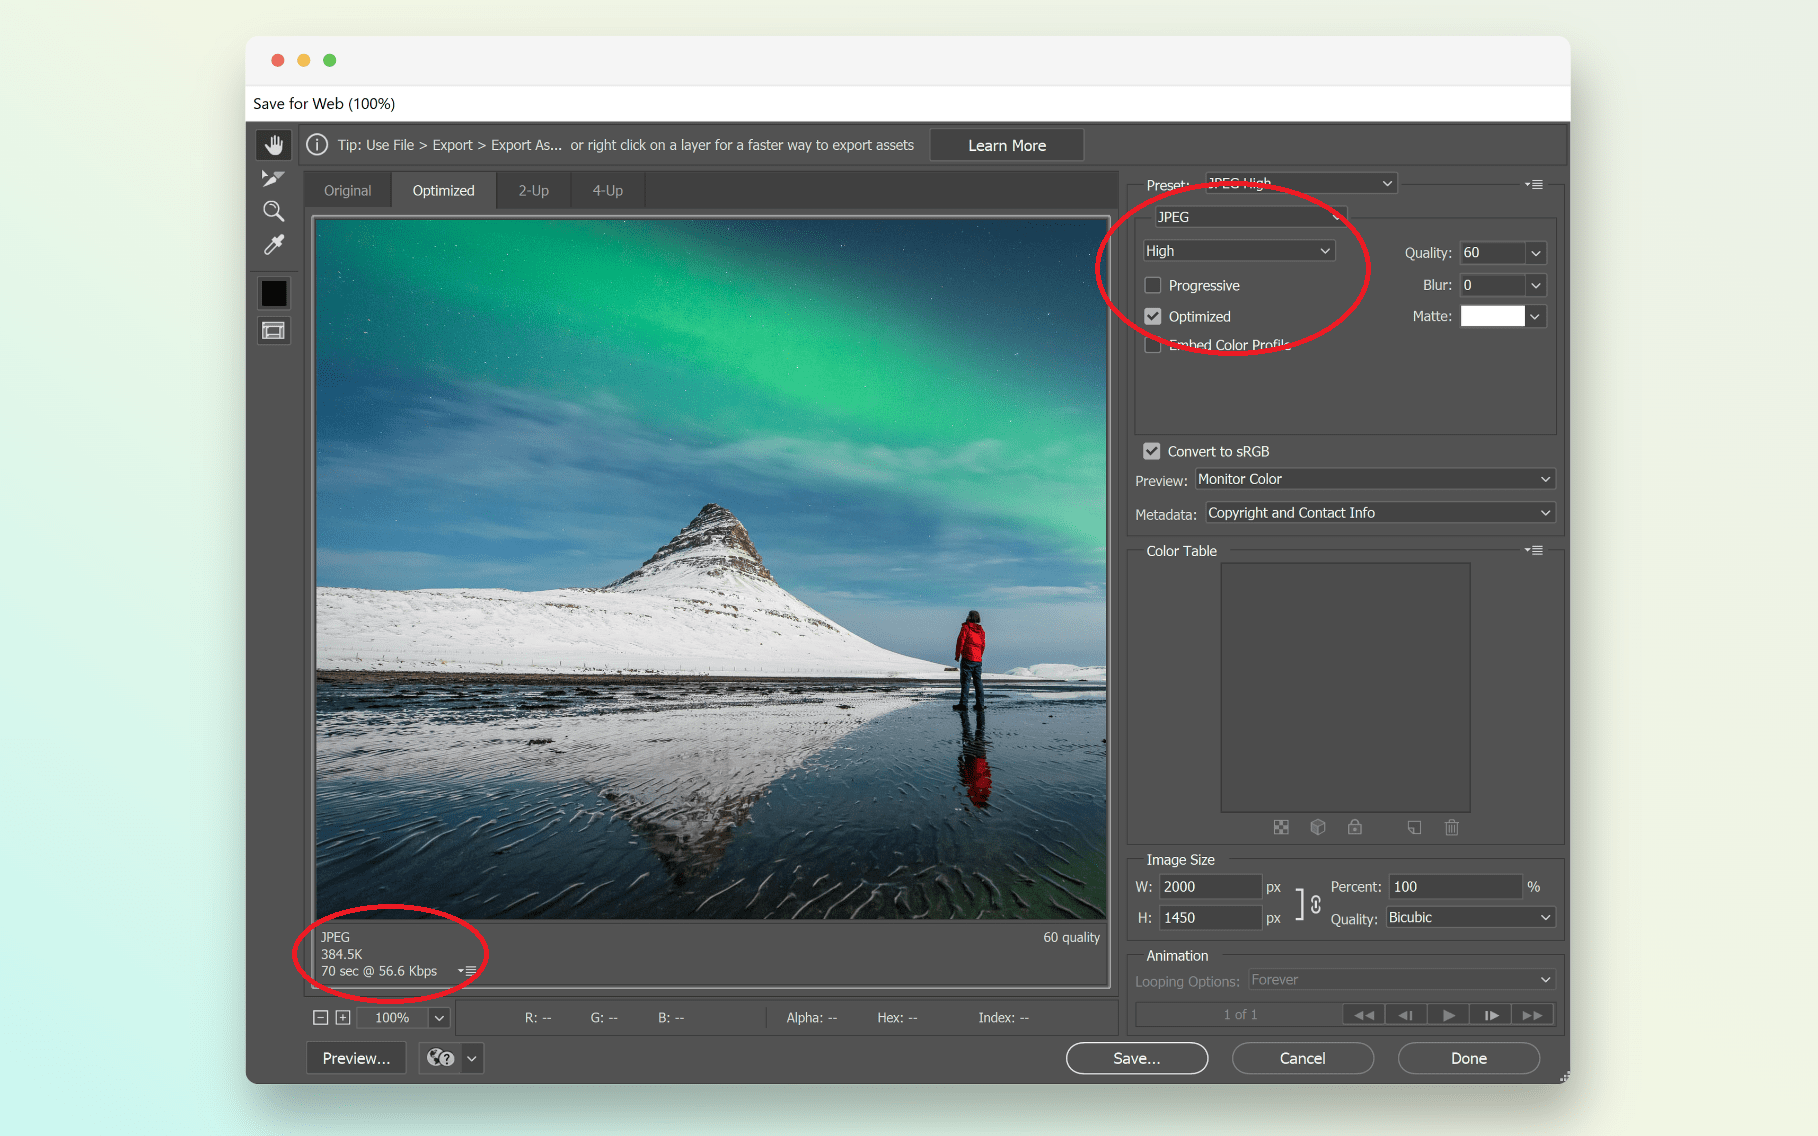 exporting an image from Adobe Photoshop using the optimize for web legacy option